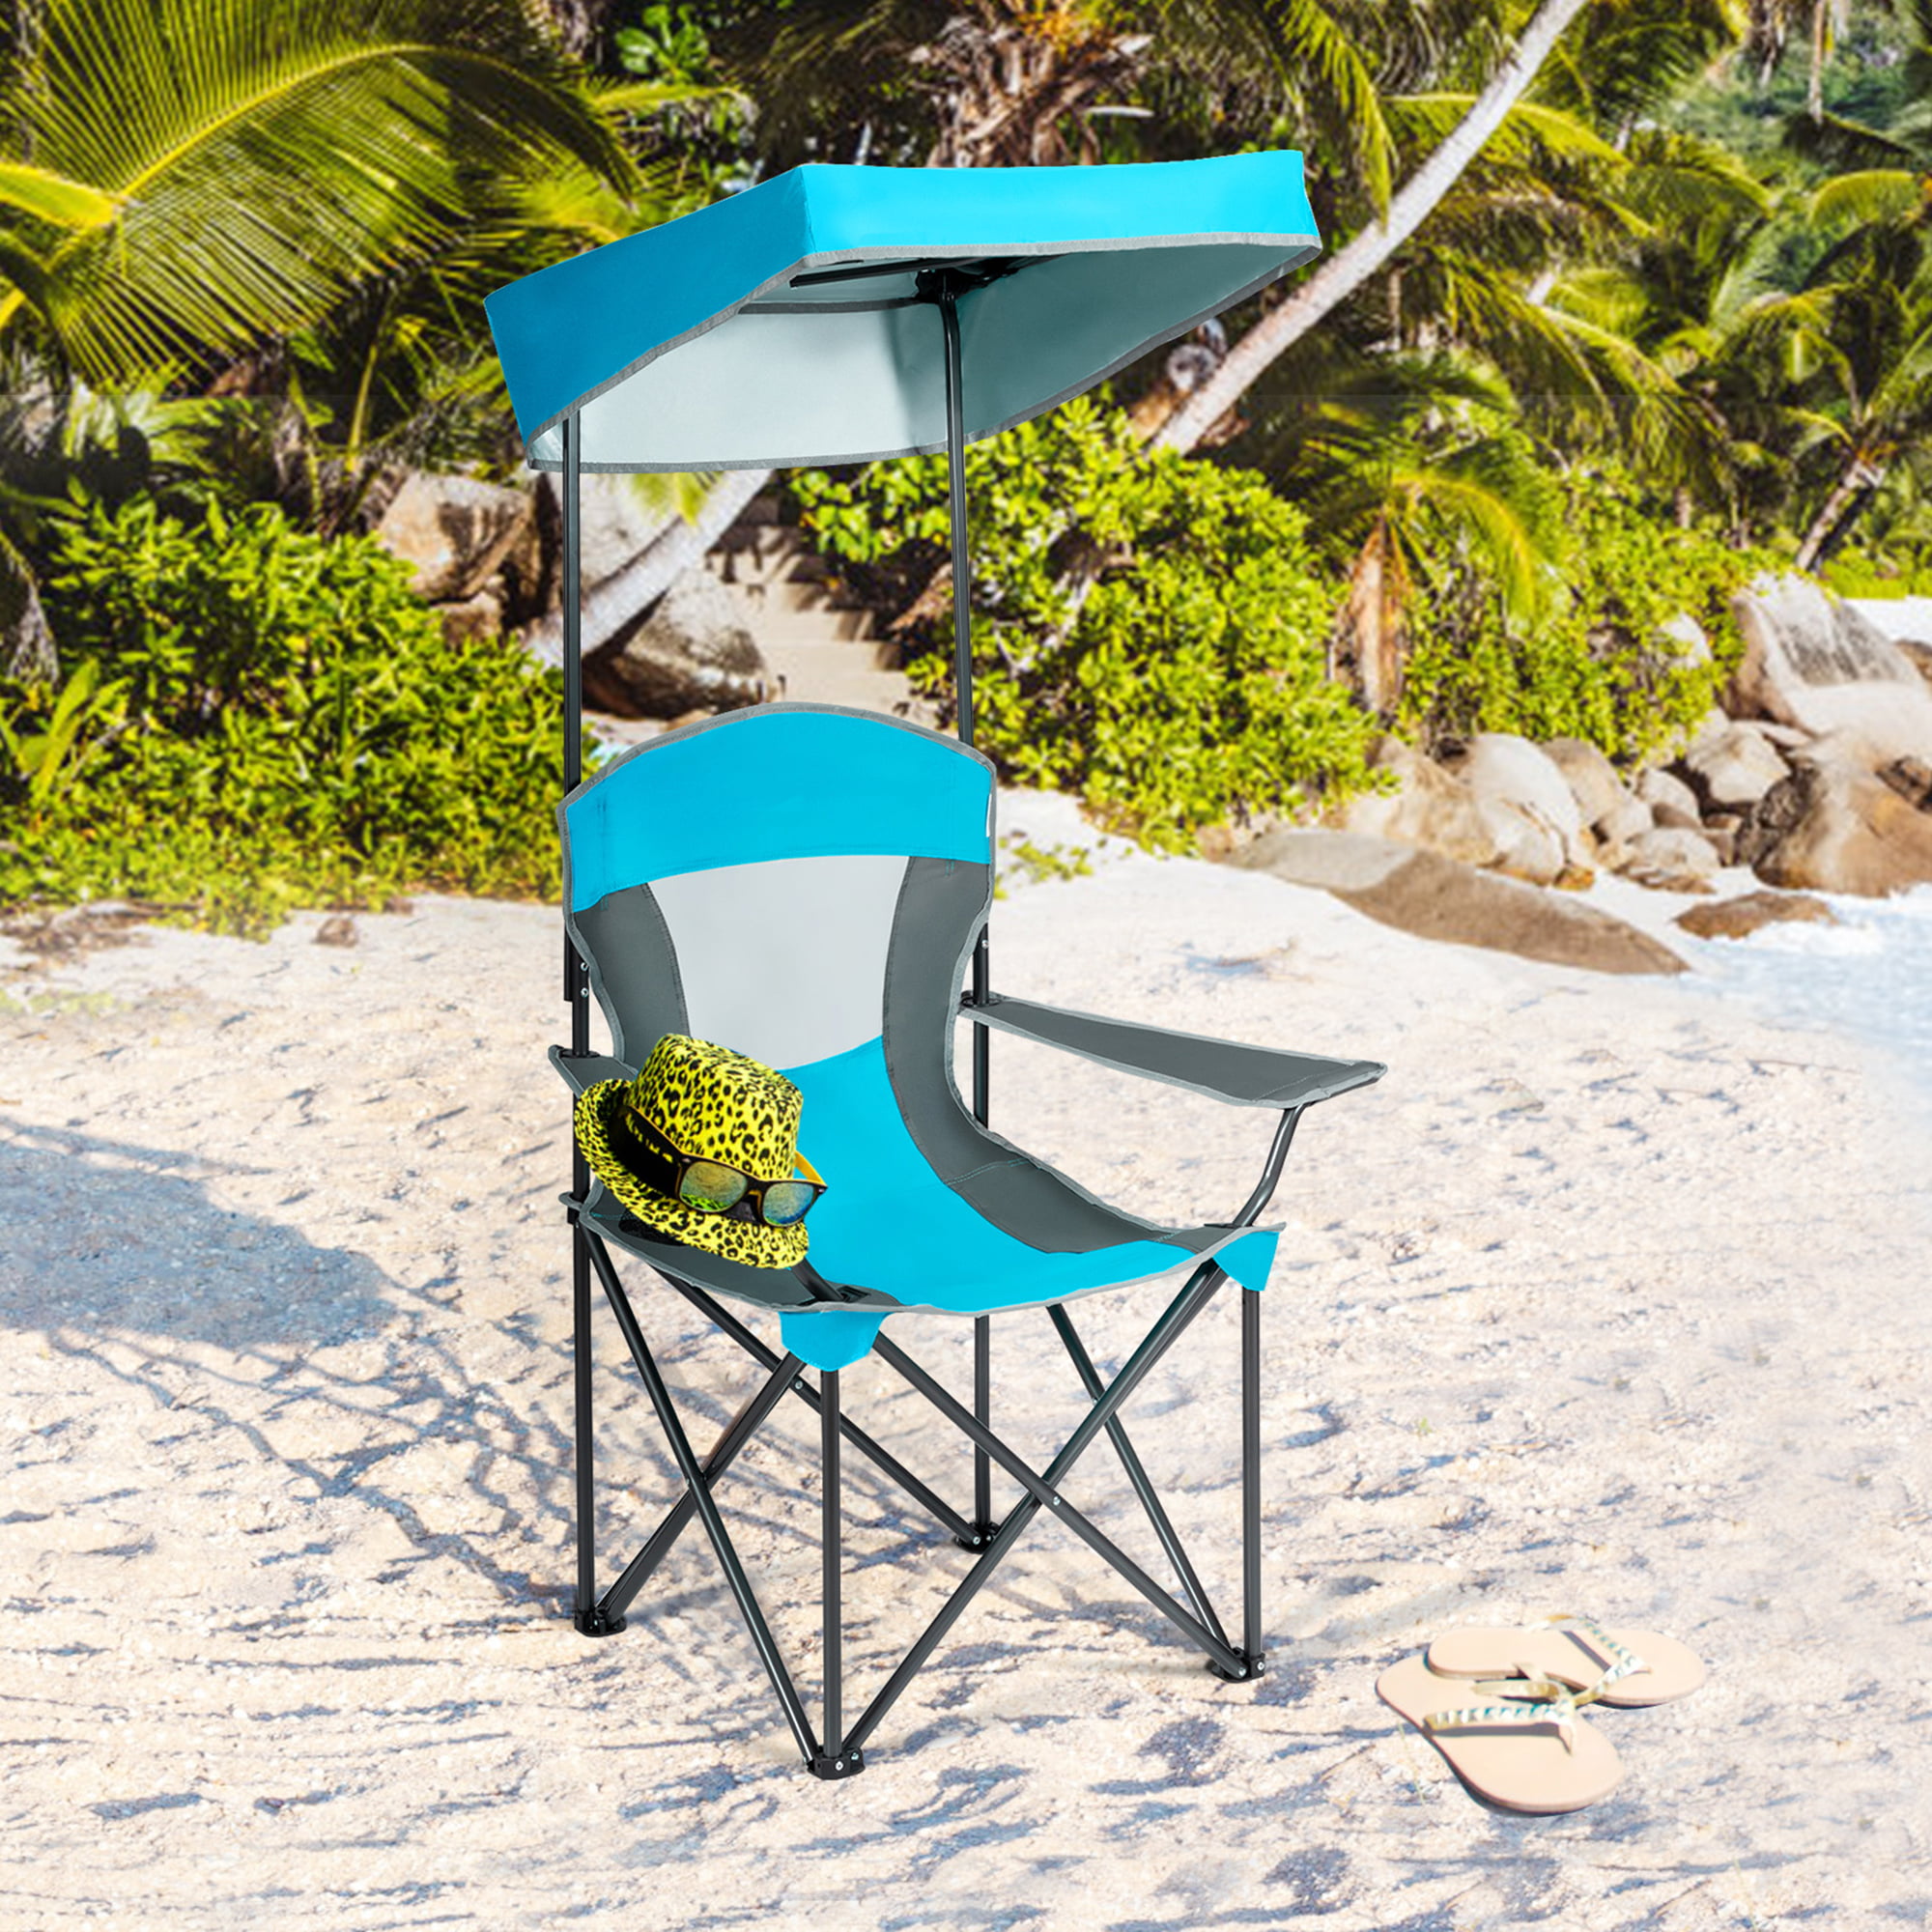 Gymax Folding Sunshade Chair Camping Chair Outdoor W Canopy Carrying